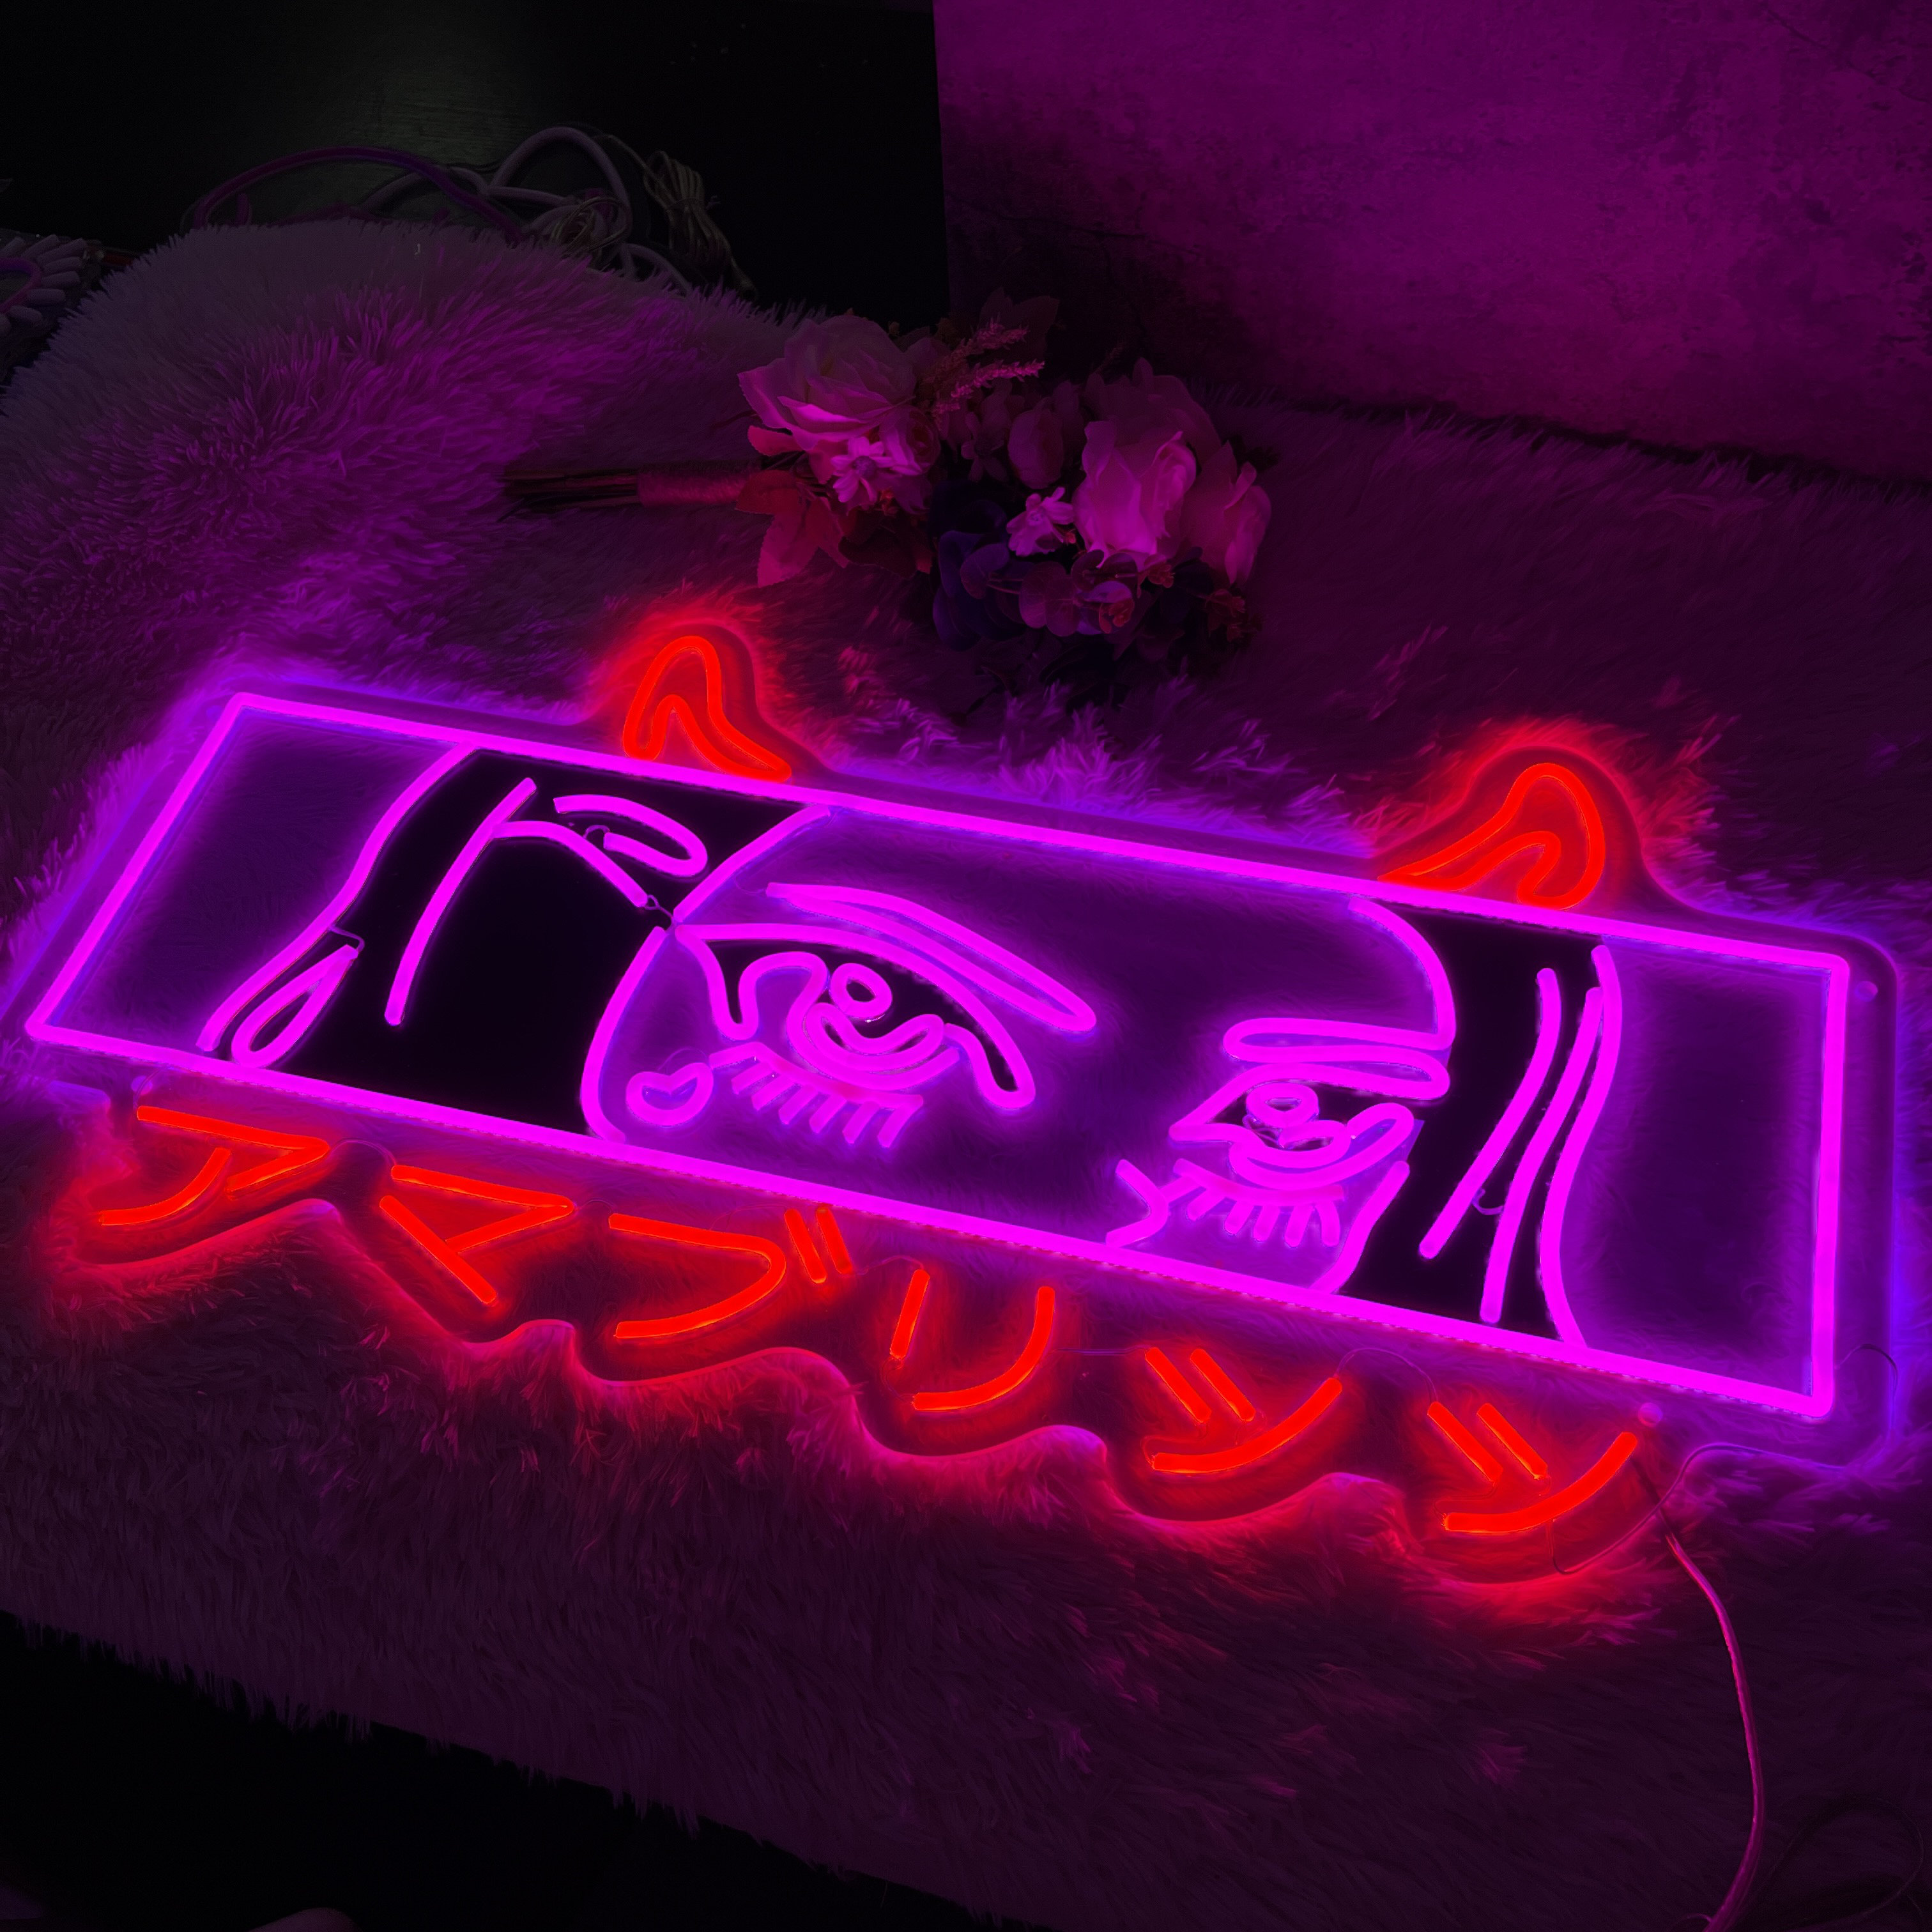 ANIME GIRL TOMIE LED LIGHT NEON SIGN Wall ART HOME Decor GAME ROOM PARTY  GIFT GF | eBay